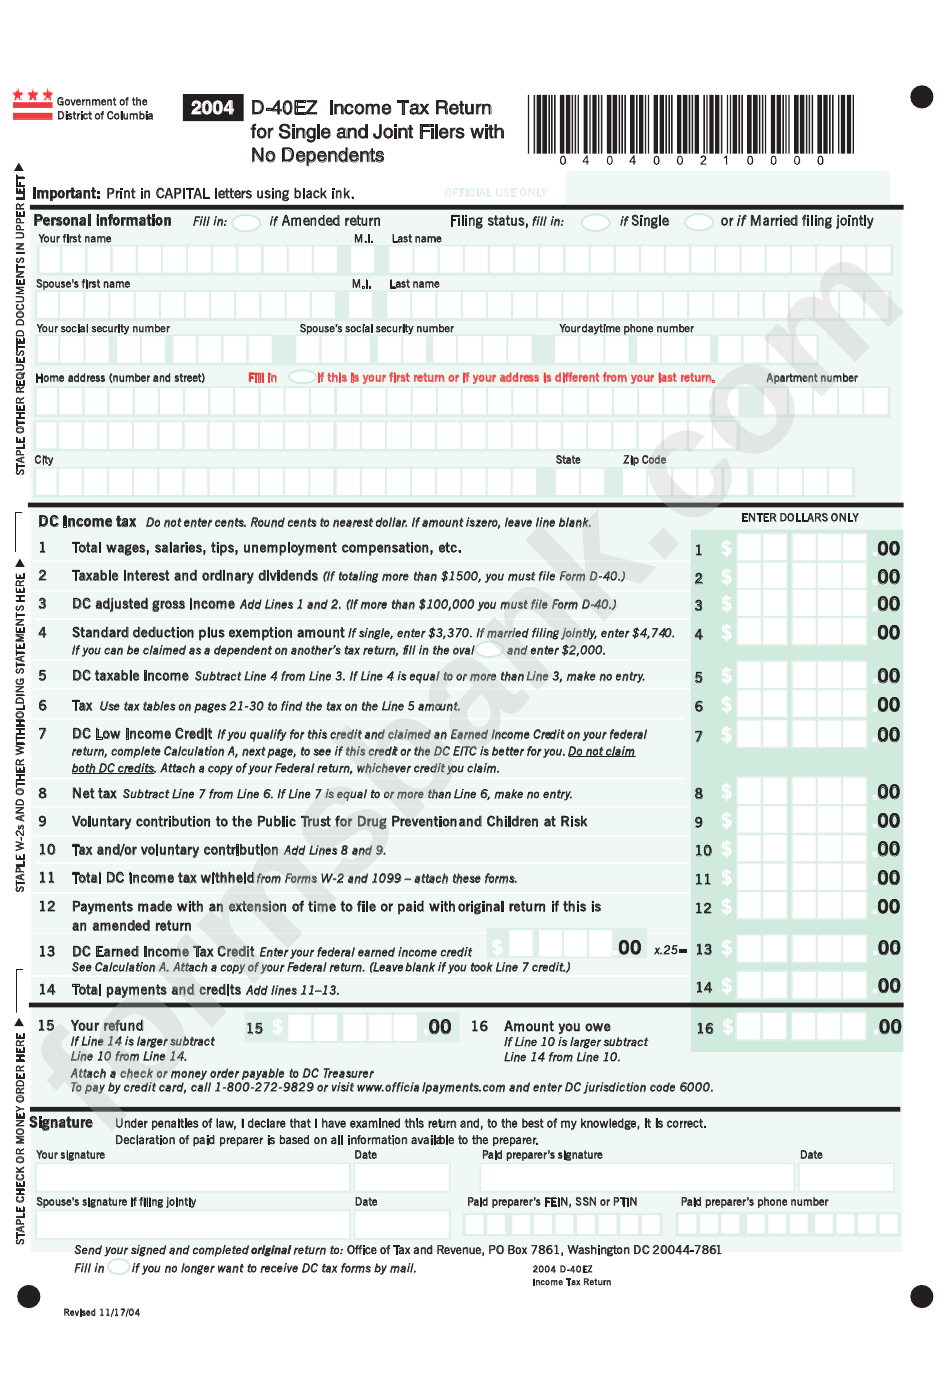 Form D-40ez - Income Tax Return For Single And Joint Filers With No Dependents - 2004